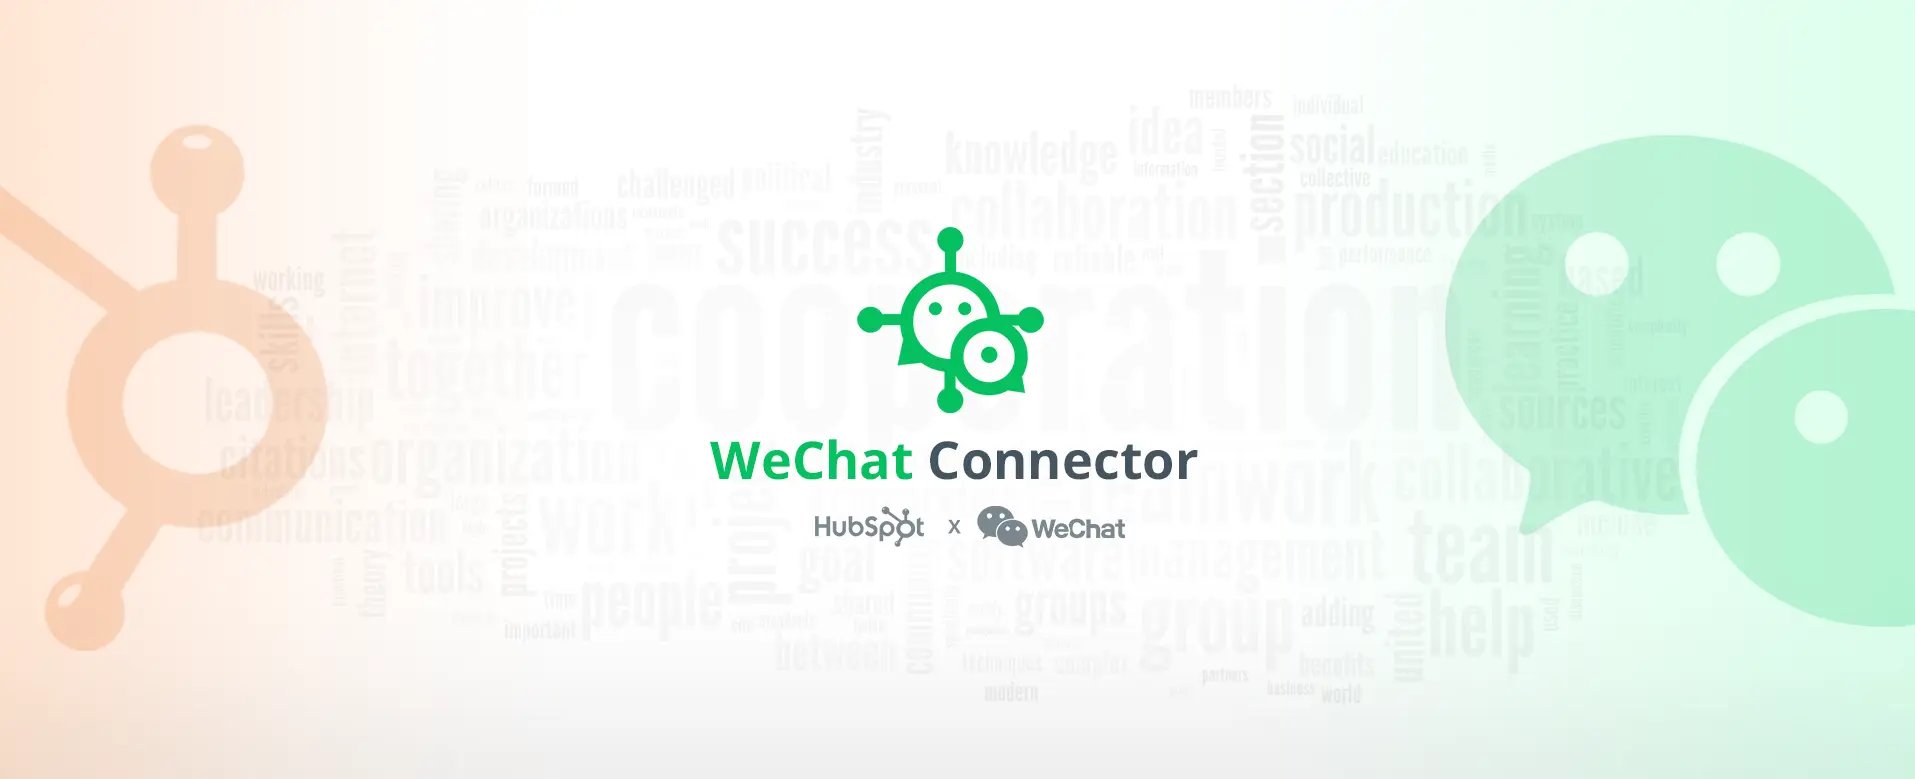 WECHAT-HUBSPOT INTEGRATION FOR MARKETING AND SALES IN CHINA